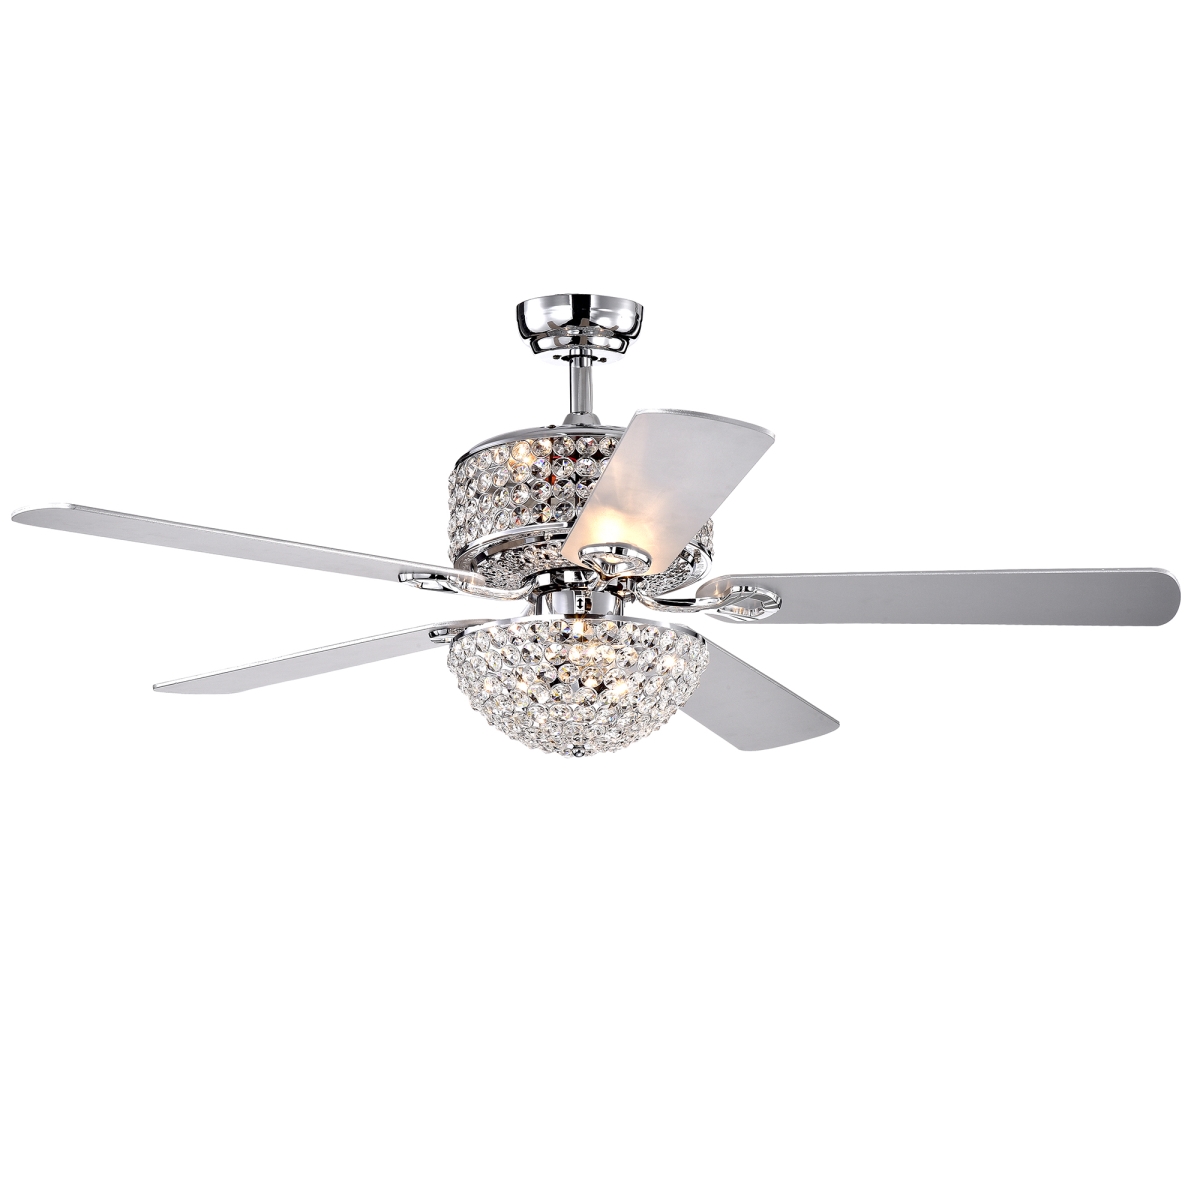 Cfl-8170remo-ch 52 In. Laure 5-blade Lighted Ceiling Fan With Crystal Shaded Chandelier, Chrome